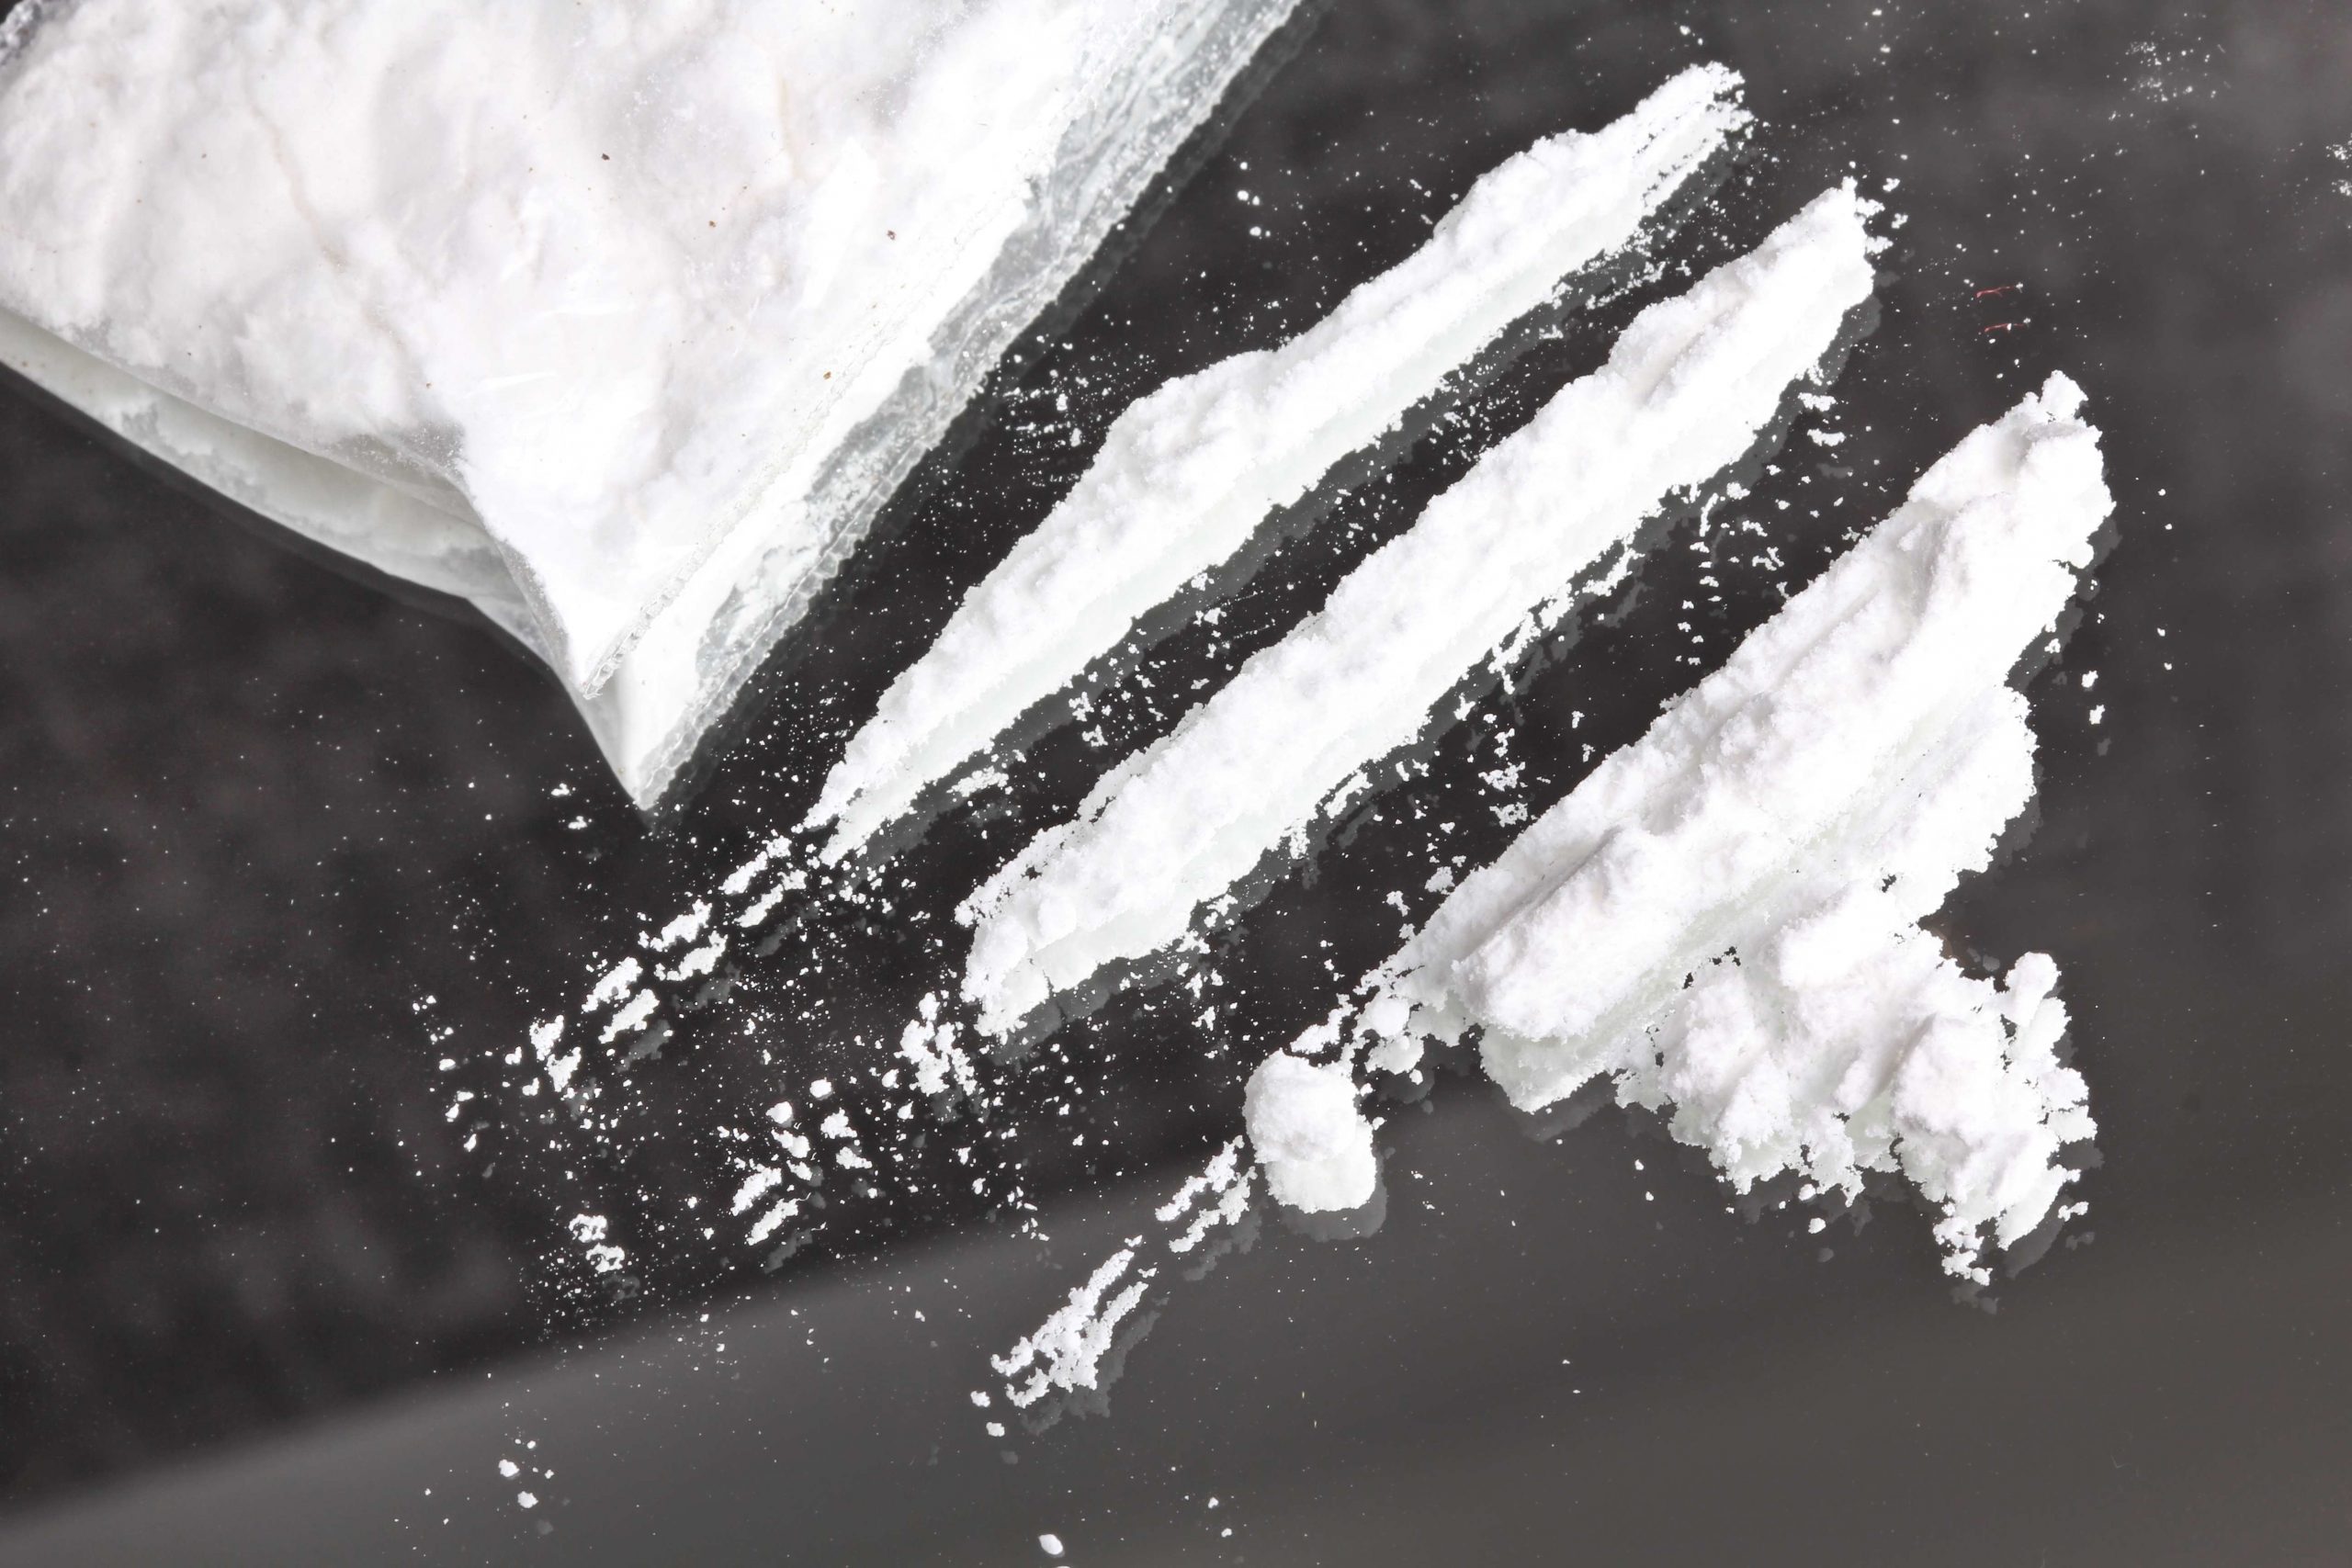 Report: Drug Users in Athens Prefer Cocaine, Amphetamines and Meth